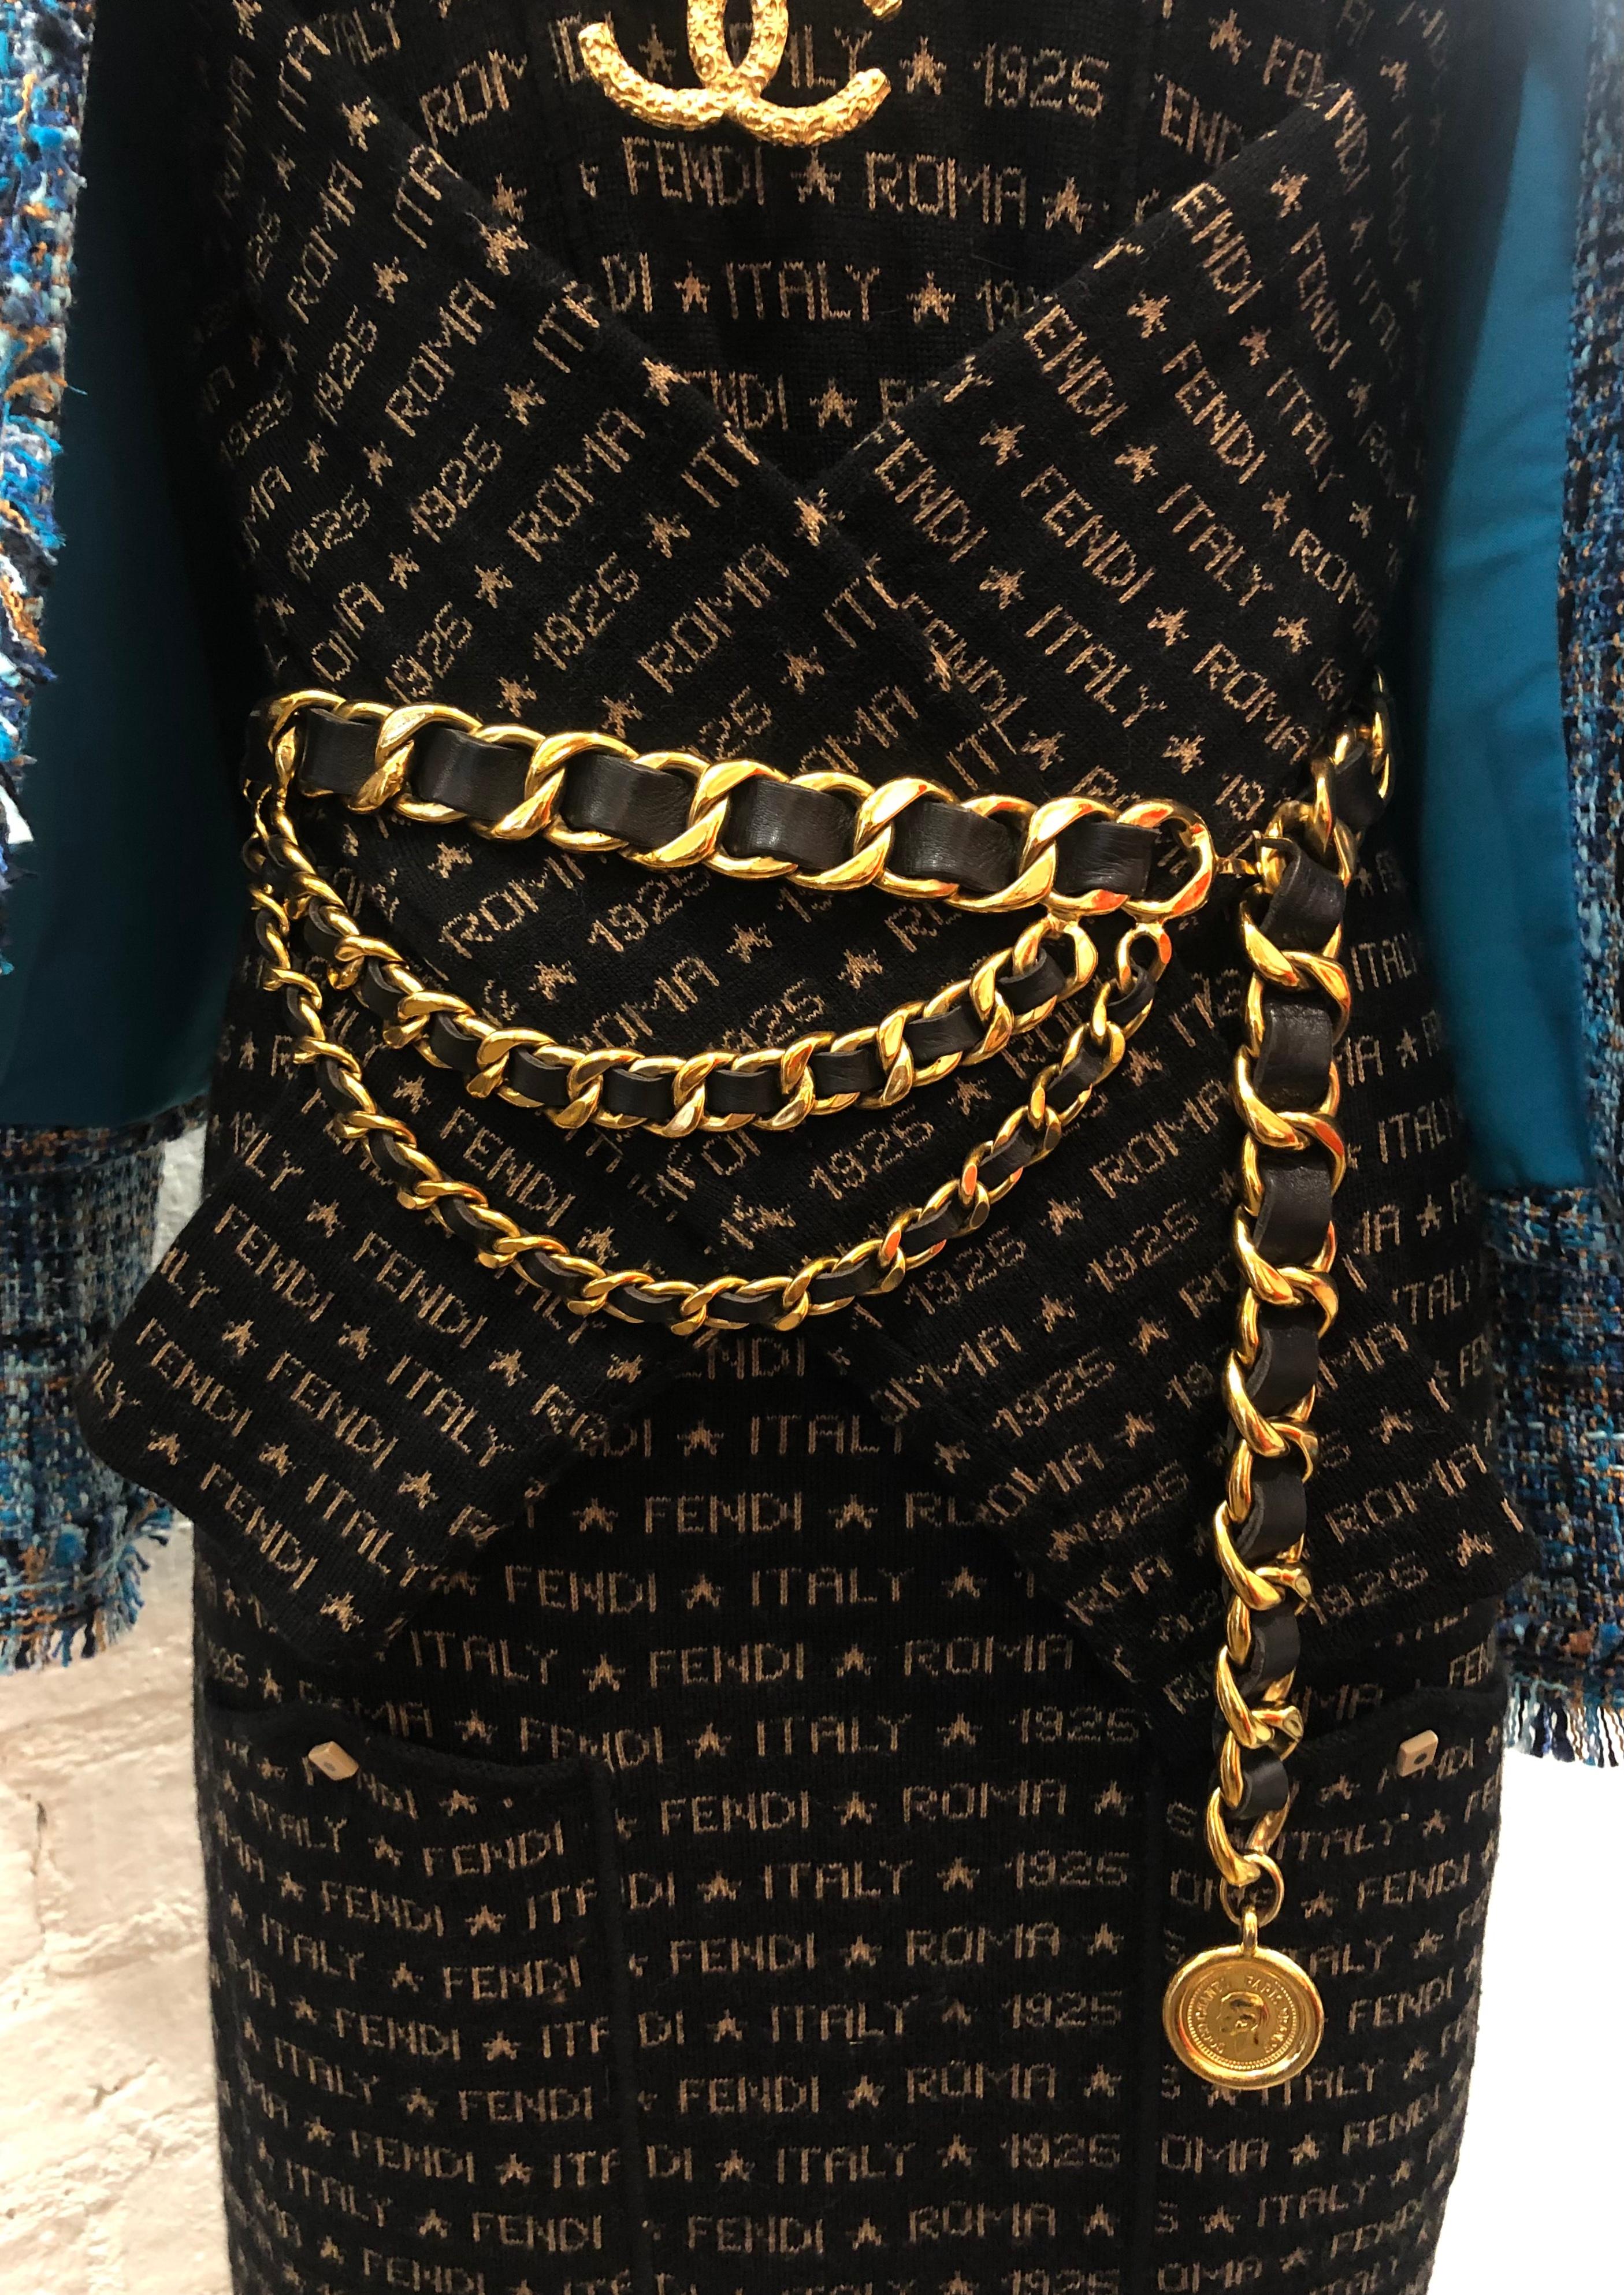 This vintage CHANEL chain belt is crafted of gold toned chains interlaced with black leather with triple chain draping featuring a Cambon coin charm. This statement Chanel chain belt was seen on runway in the 1990s. Stamped 94P CHANEL made in